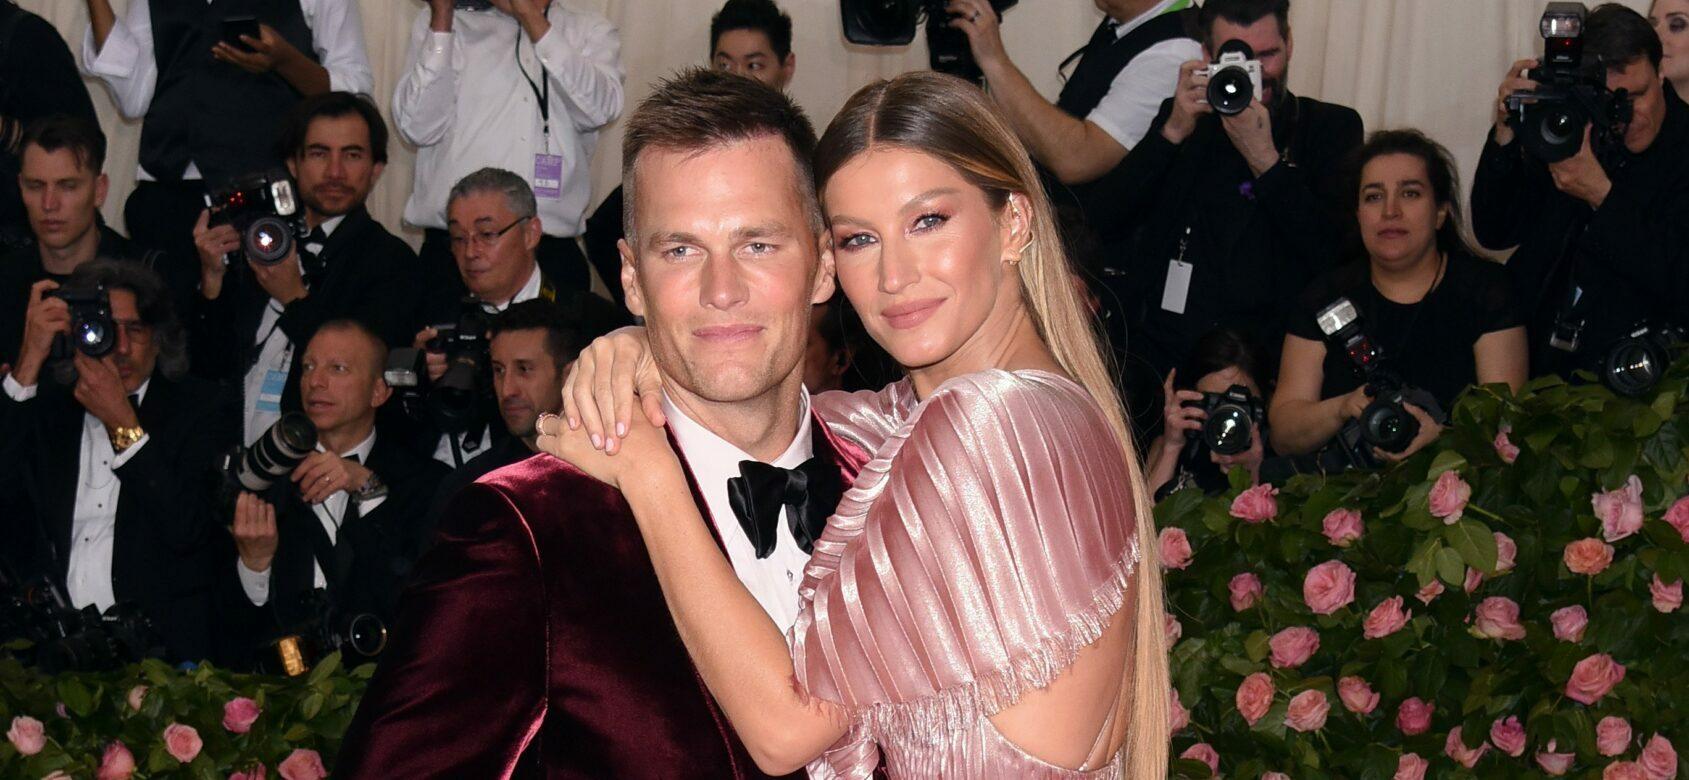 Tom Brady Posts Mother’s Day Tribute To The ‘Amazing Women’ In His Life, Including Gisele Bündchen